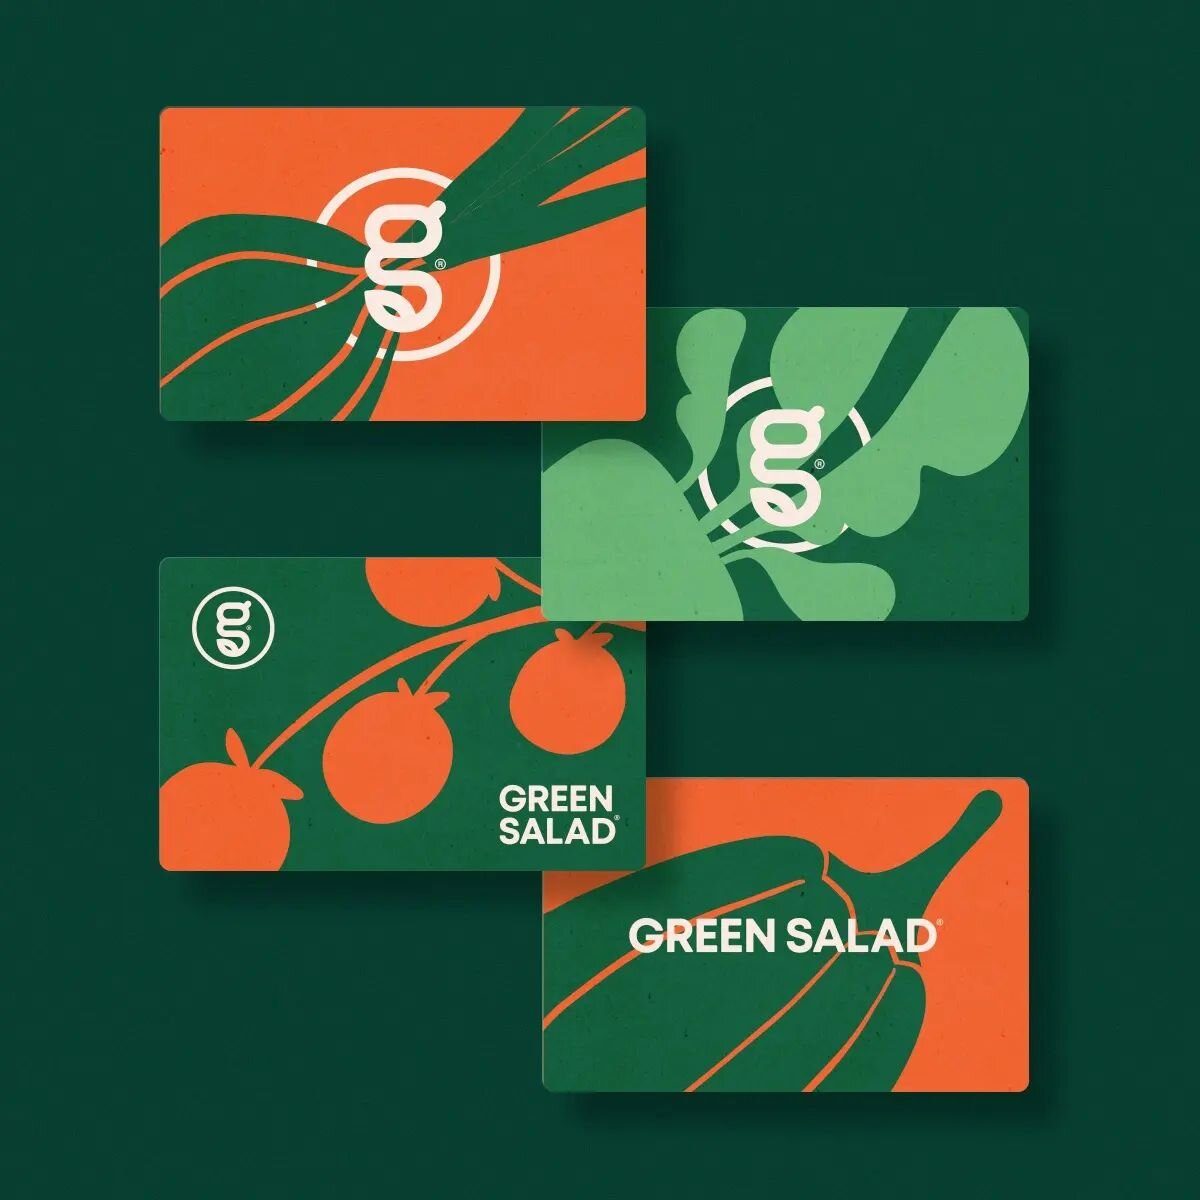 Brand assets are also very important, so we crafted with a lot love and care these organic and natural feeling cards for Green Salad 🍃 
_

#logo #restaurant #branding #identity #fastfood #food #colors #logoinspirations #logosai #dribbble #behance #d